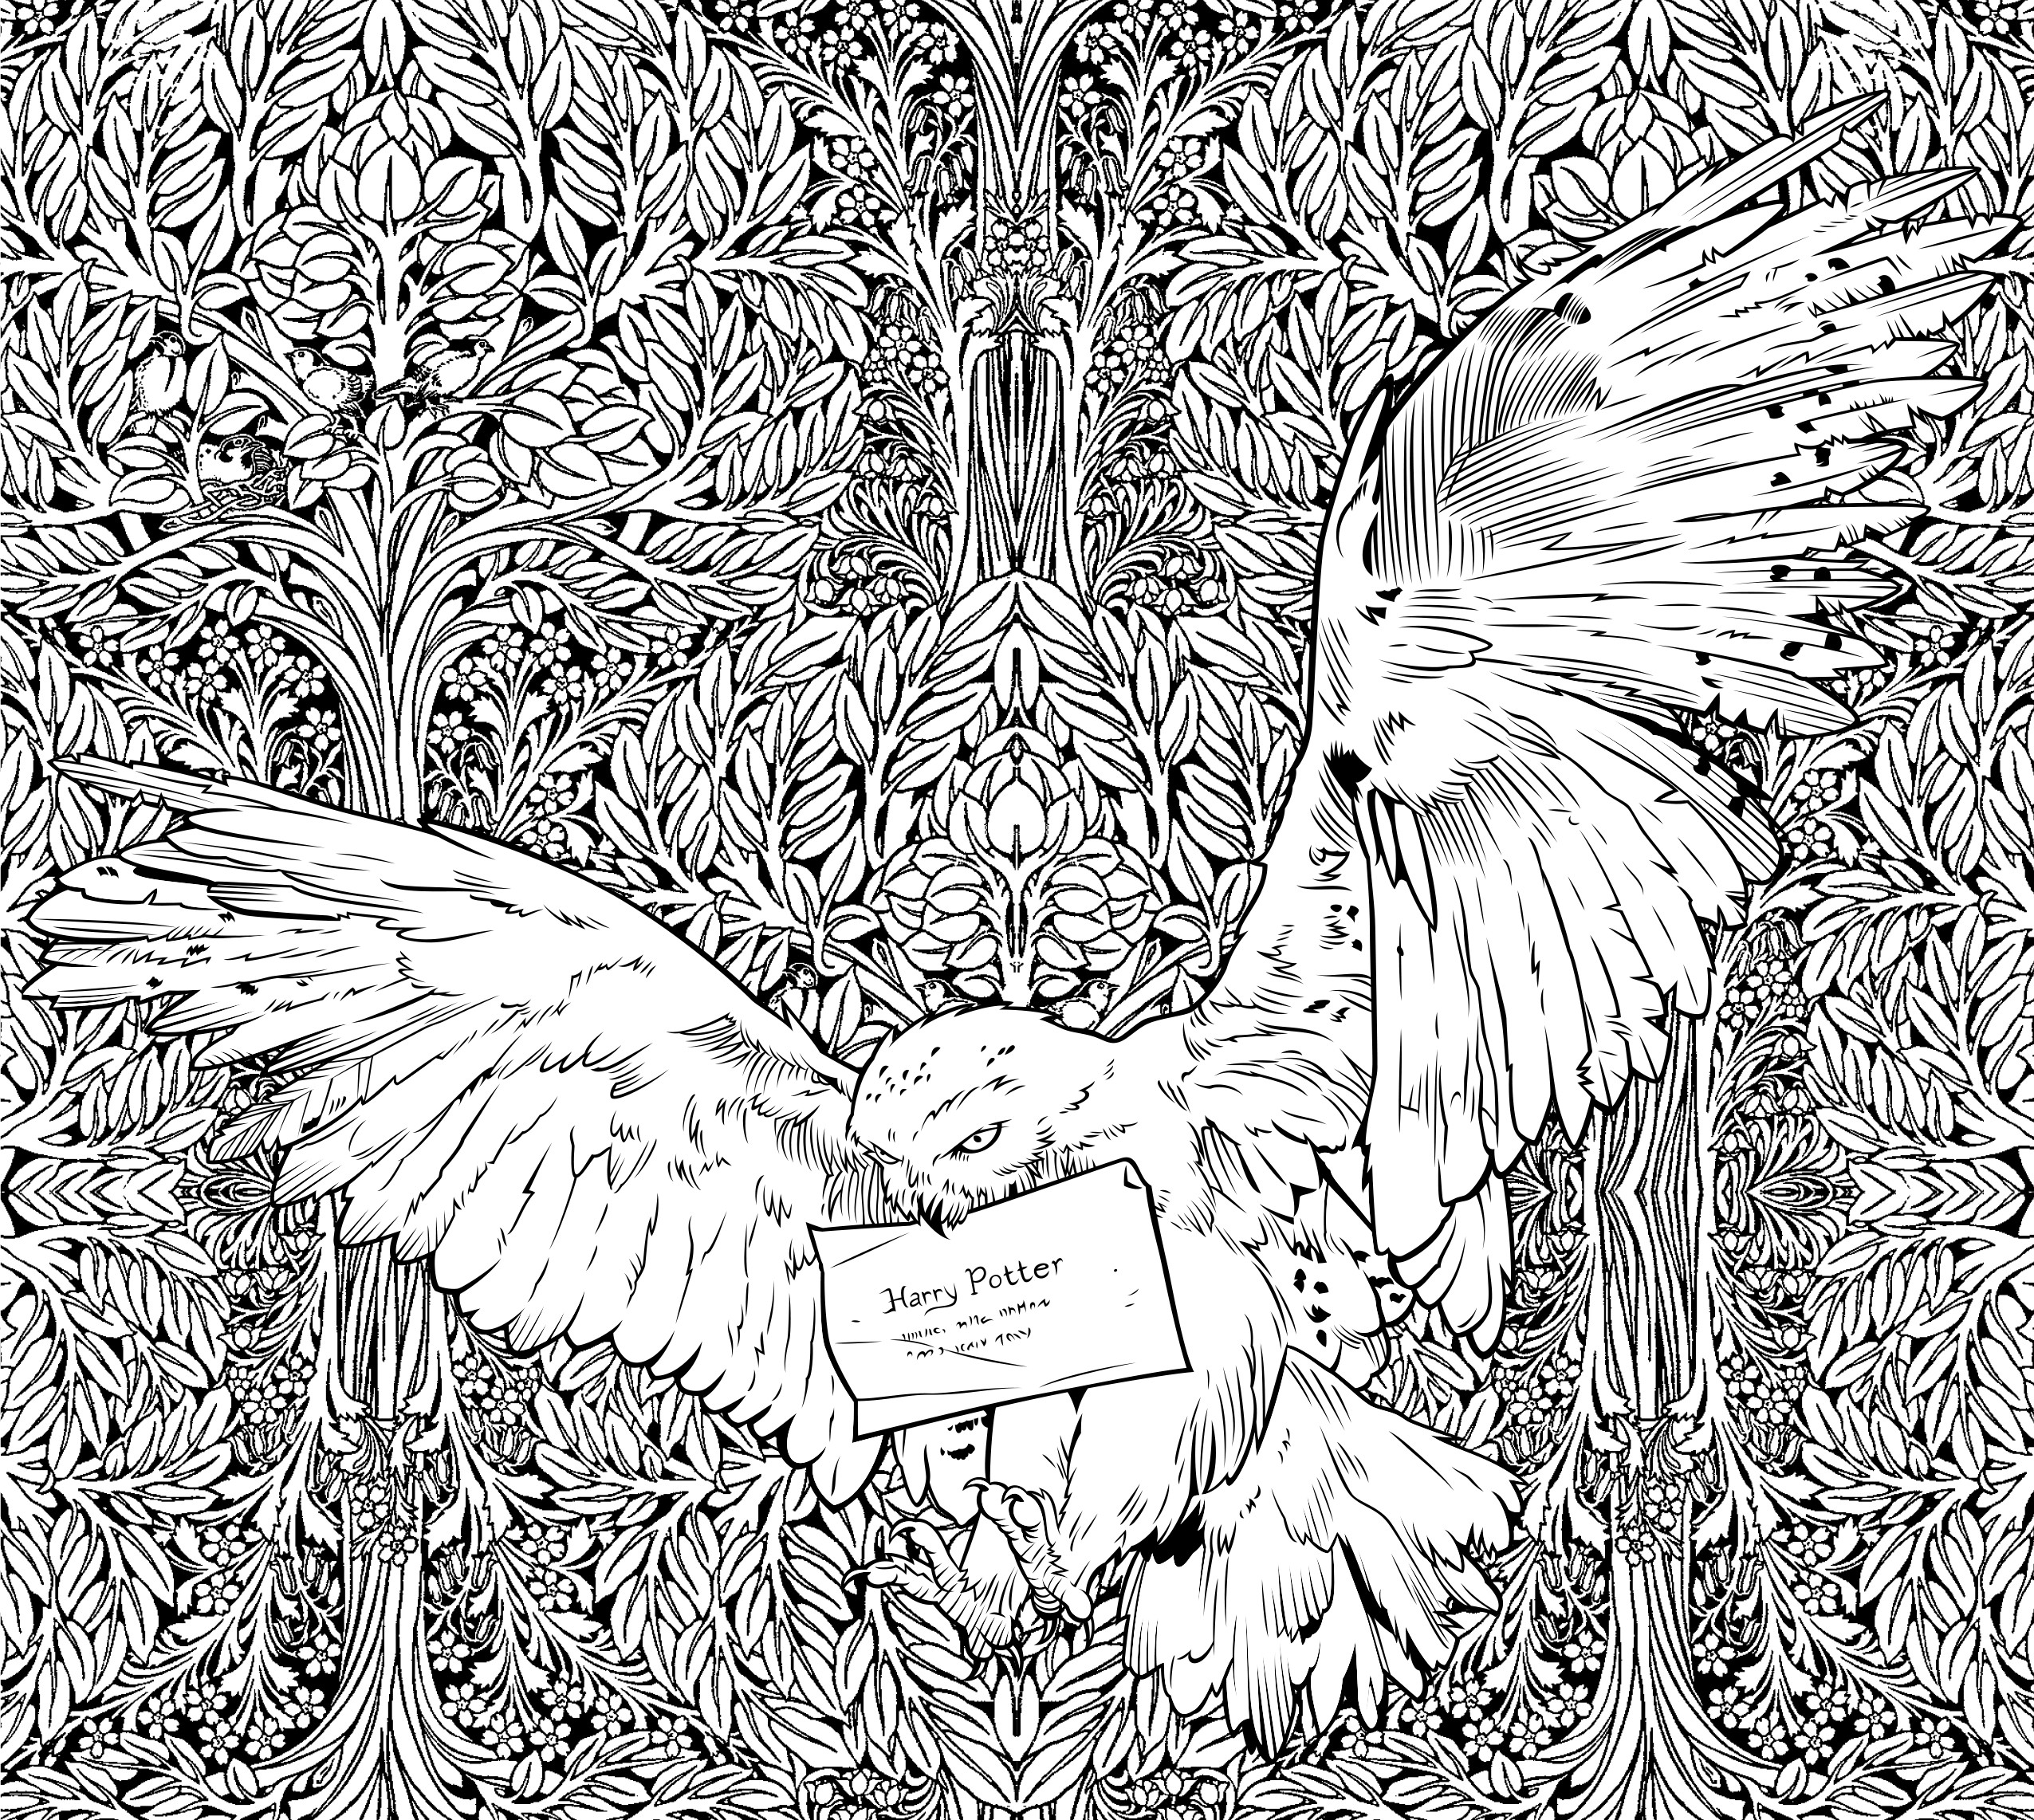 Harry Potter Adult Coloring Book
 Get a Sneak Peek of the New Harry Potter Coloring Book